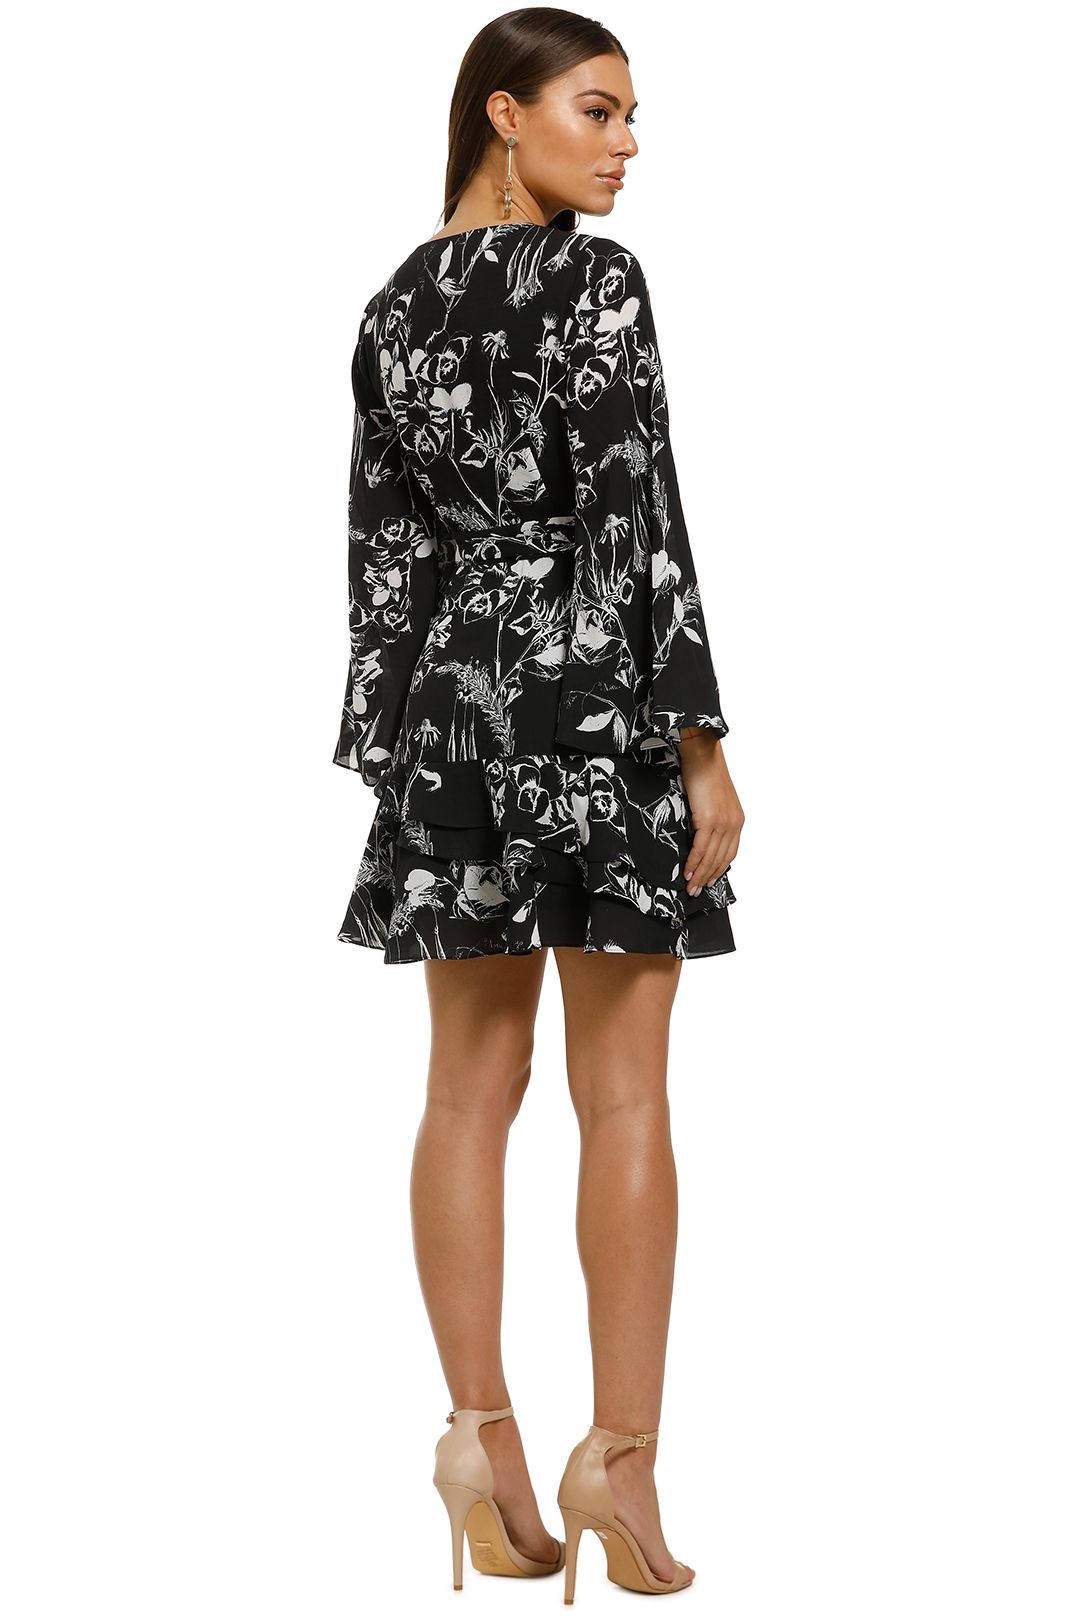 Cooper-St-Your-Own-Way-Frill-Mini-Dress-Black-Floral-Back